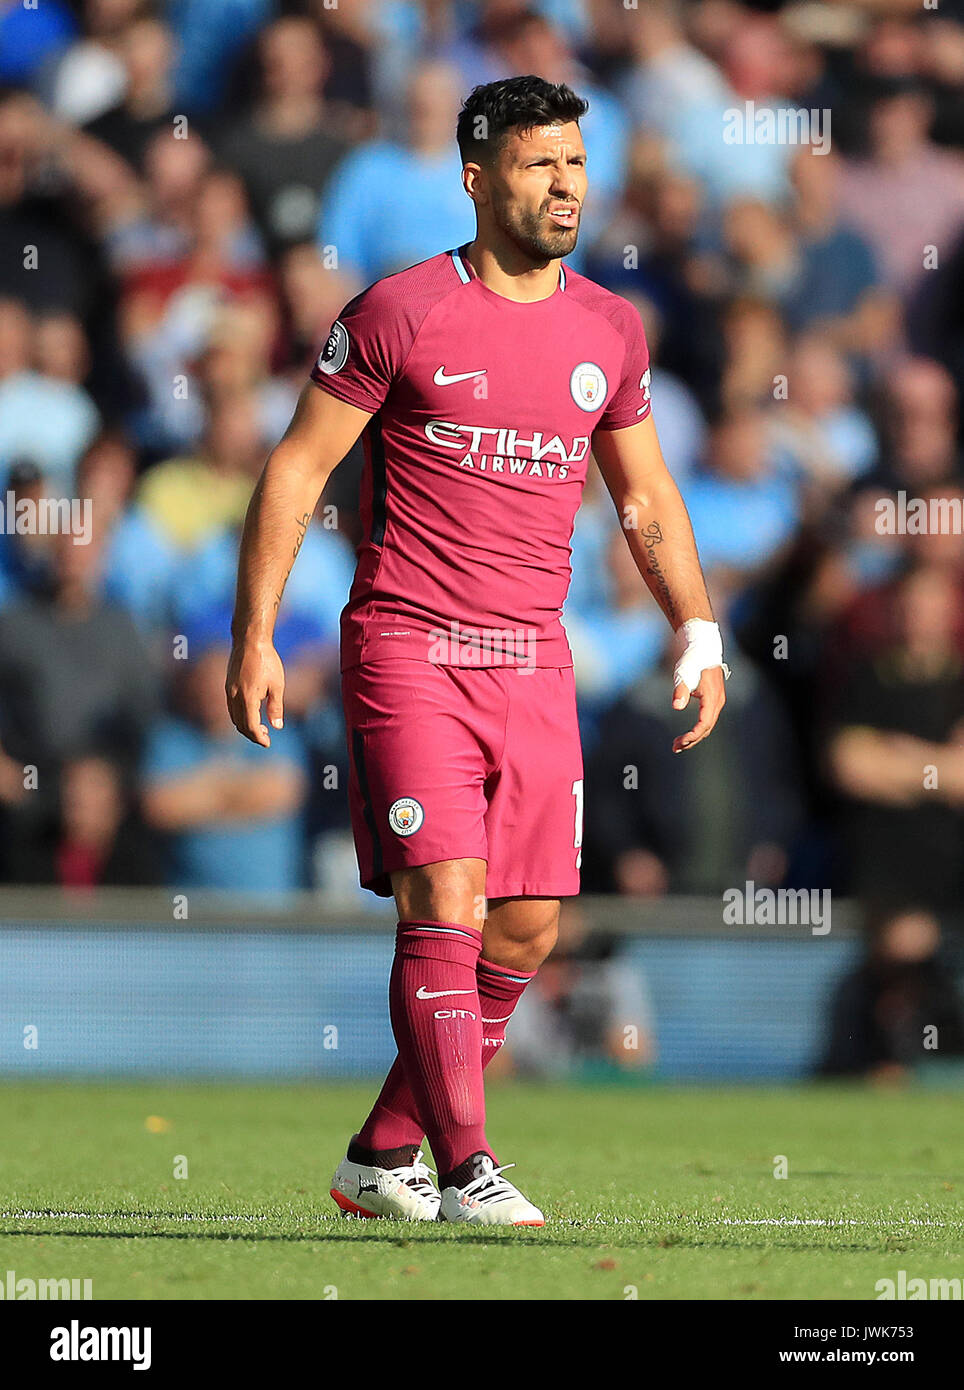 Manchester City's Sergio Aguero during the Premier League match at the AMEX Stadium, Brighton. PRESS ASSOCIATION Photo. Picture date: Saturday August 12, 2017. See PA story SOCCER Brighton. Photo credit should read: Gareth Fuller/PA Wire. RESTRICTIONS: No use with unauthorised audio, video, data, fixture lists, club/league logos or 'live' services. Online in-match use limited to 75 images, no video emulation. No use in betting, games or single club/league/player publications. Stock Photo